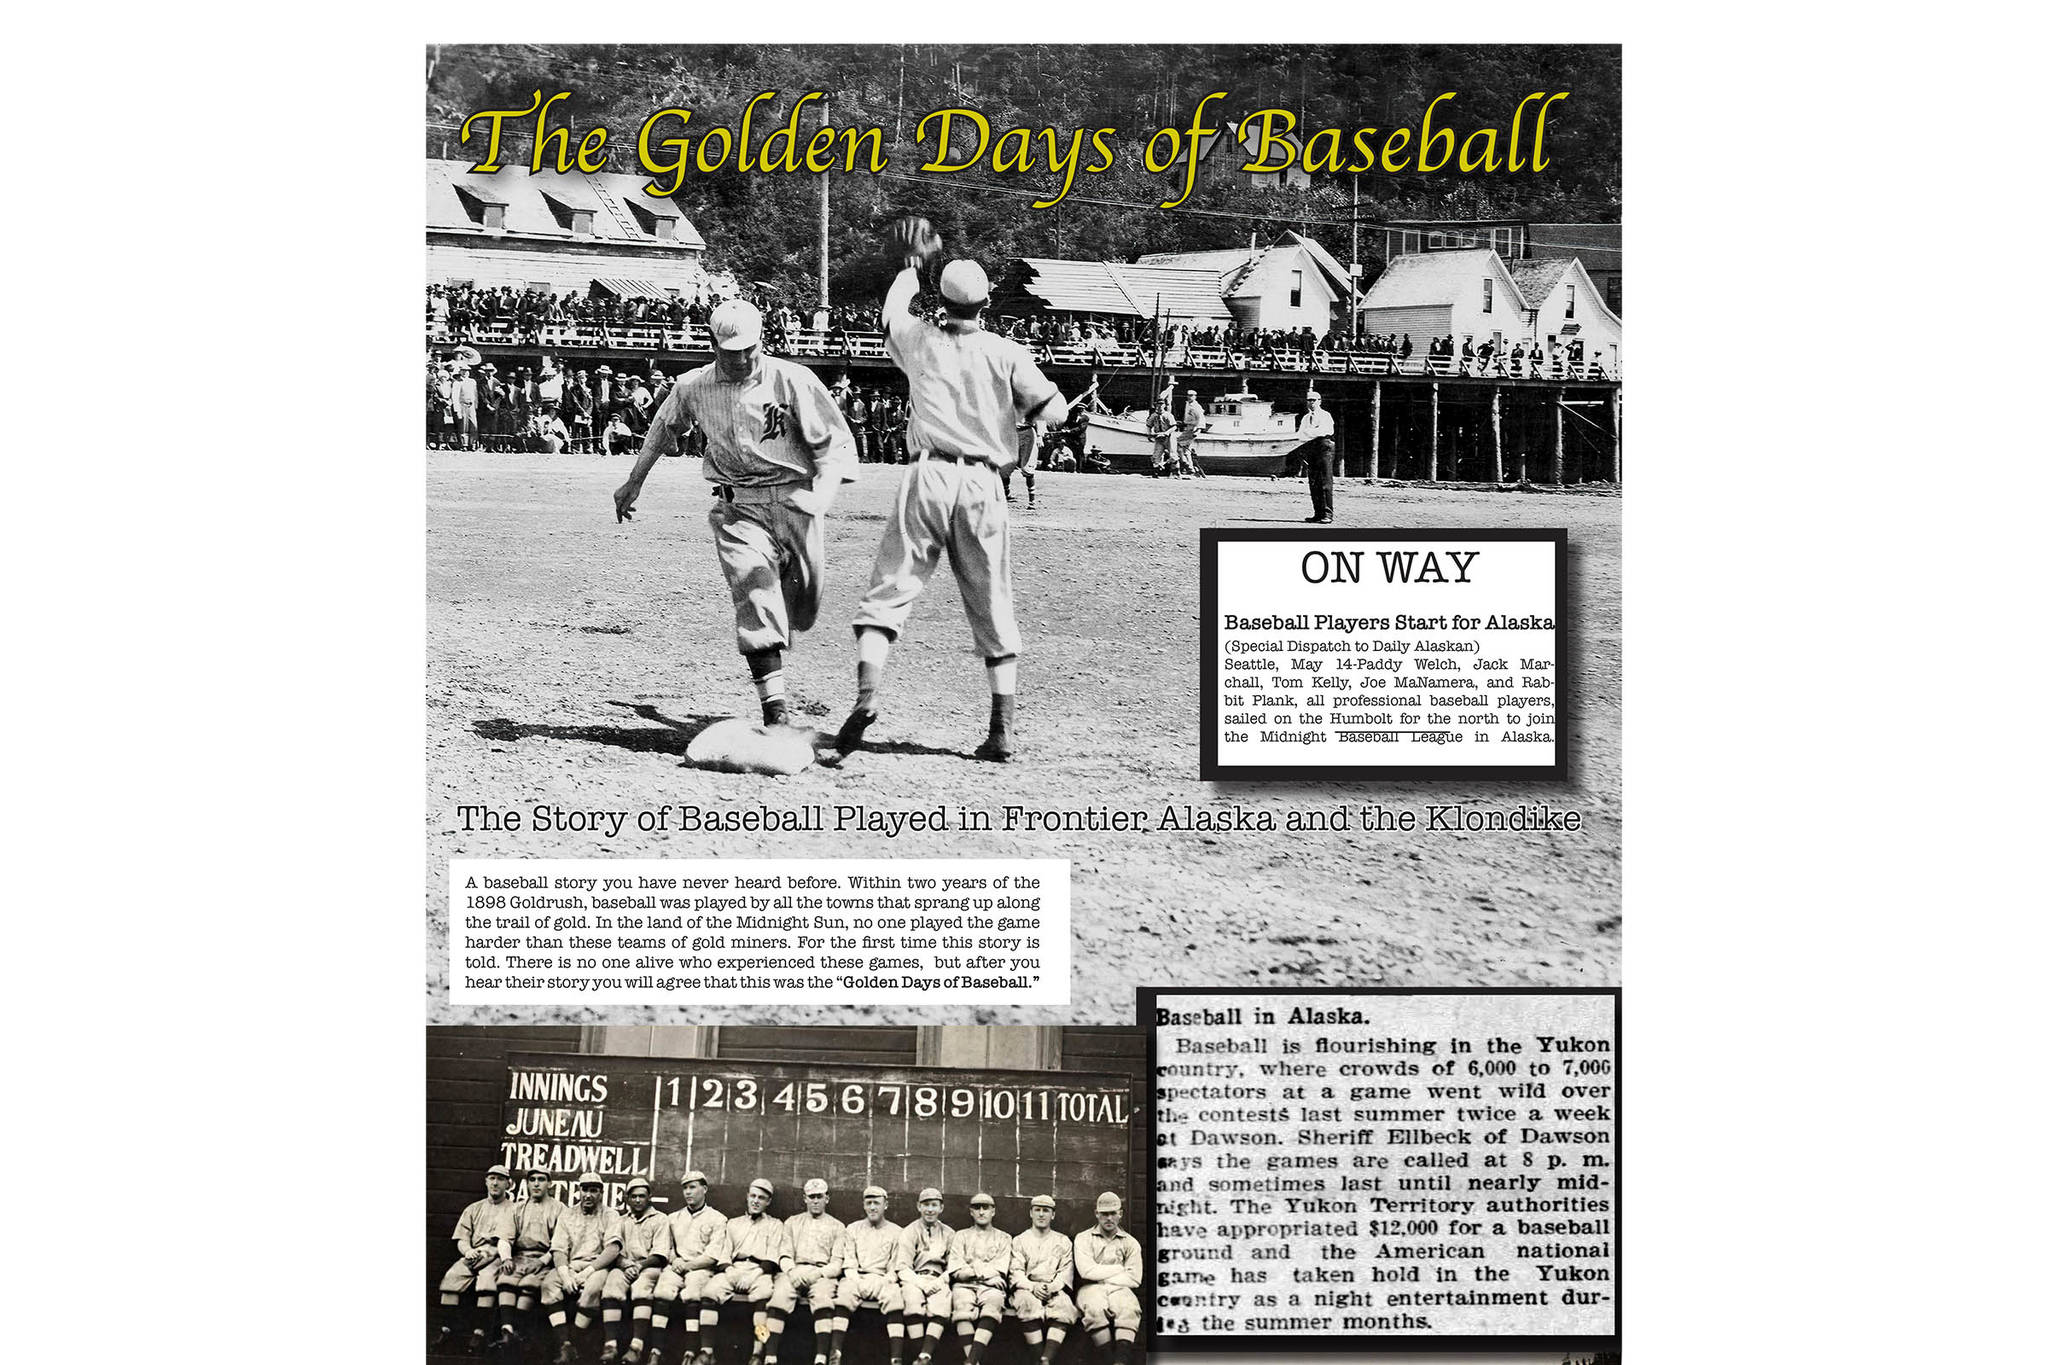 Courtesy image / Larry Johansen
Local author Larry Johansen has written a book about the history of baseball in Alaska during the Gold Rush. The book, called “The Golden Days of Baseball, The Story of Baseball Played in Frontier Alaska and the Klondike” is the first about this previously unexplored topic. The book is available for purchase beginning May 5.